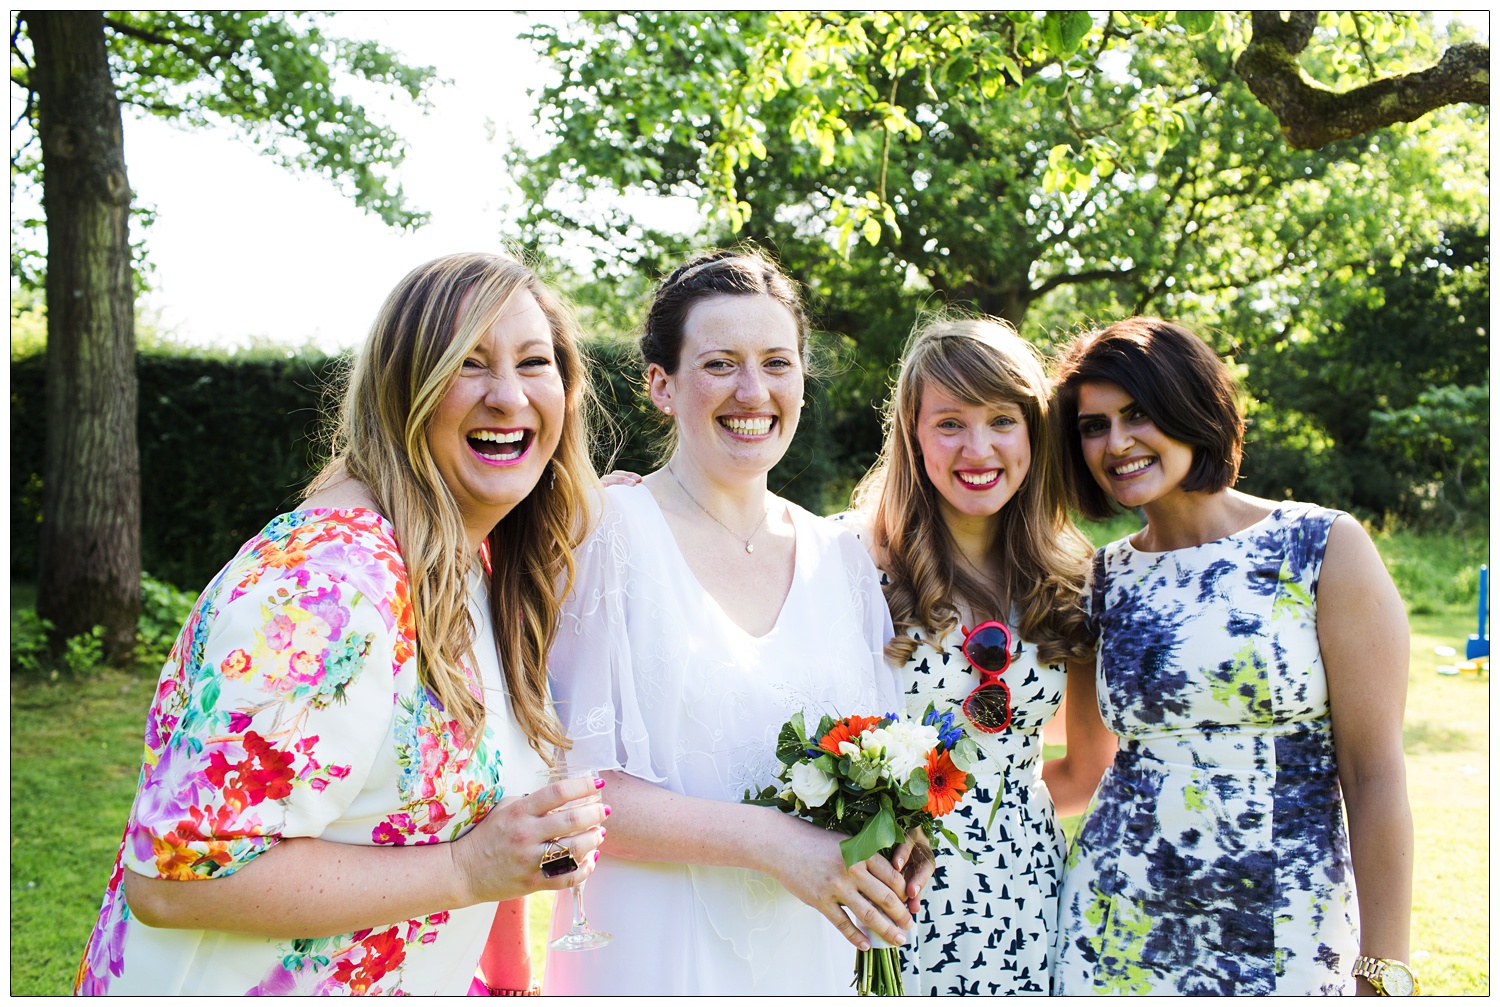 The bride with her friends are smiling.